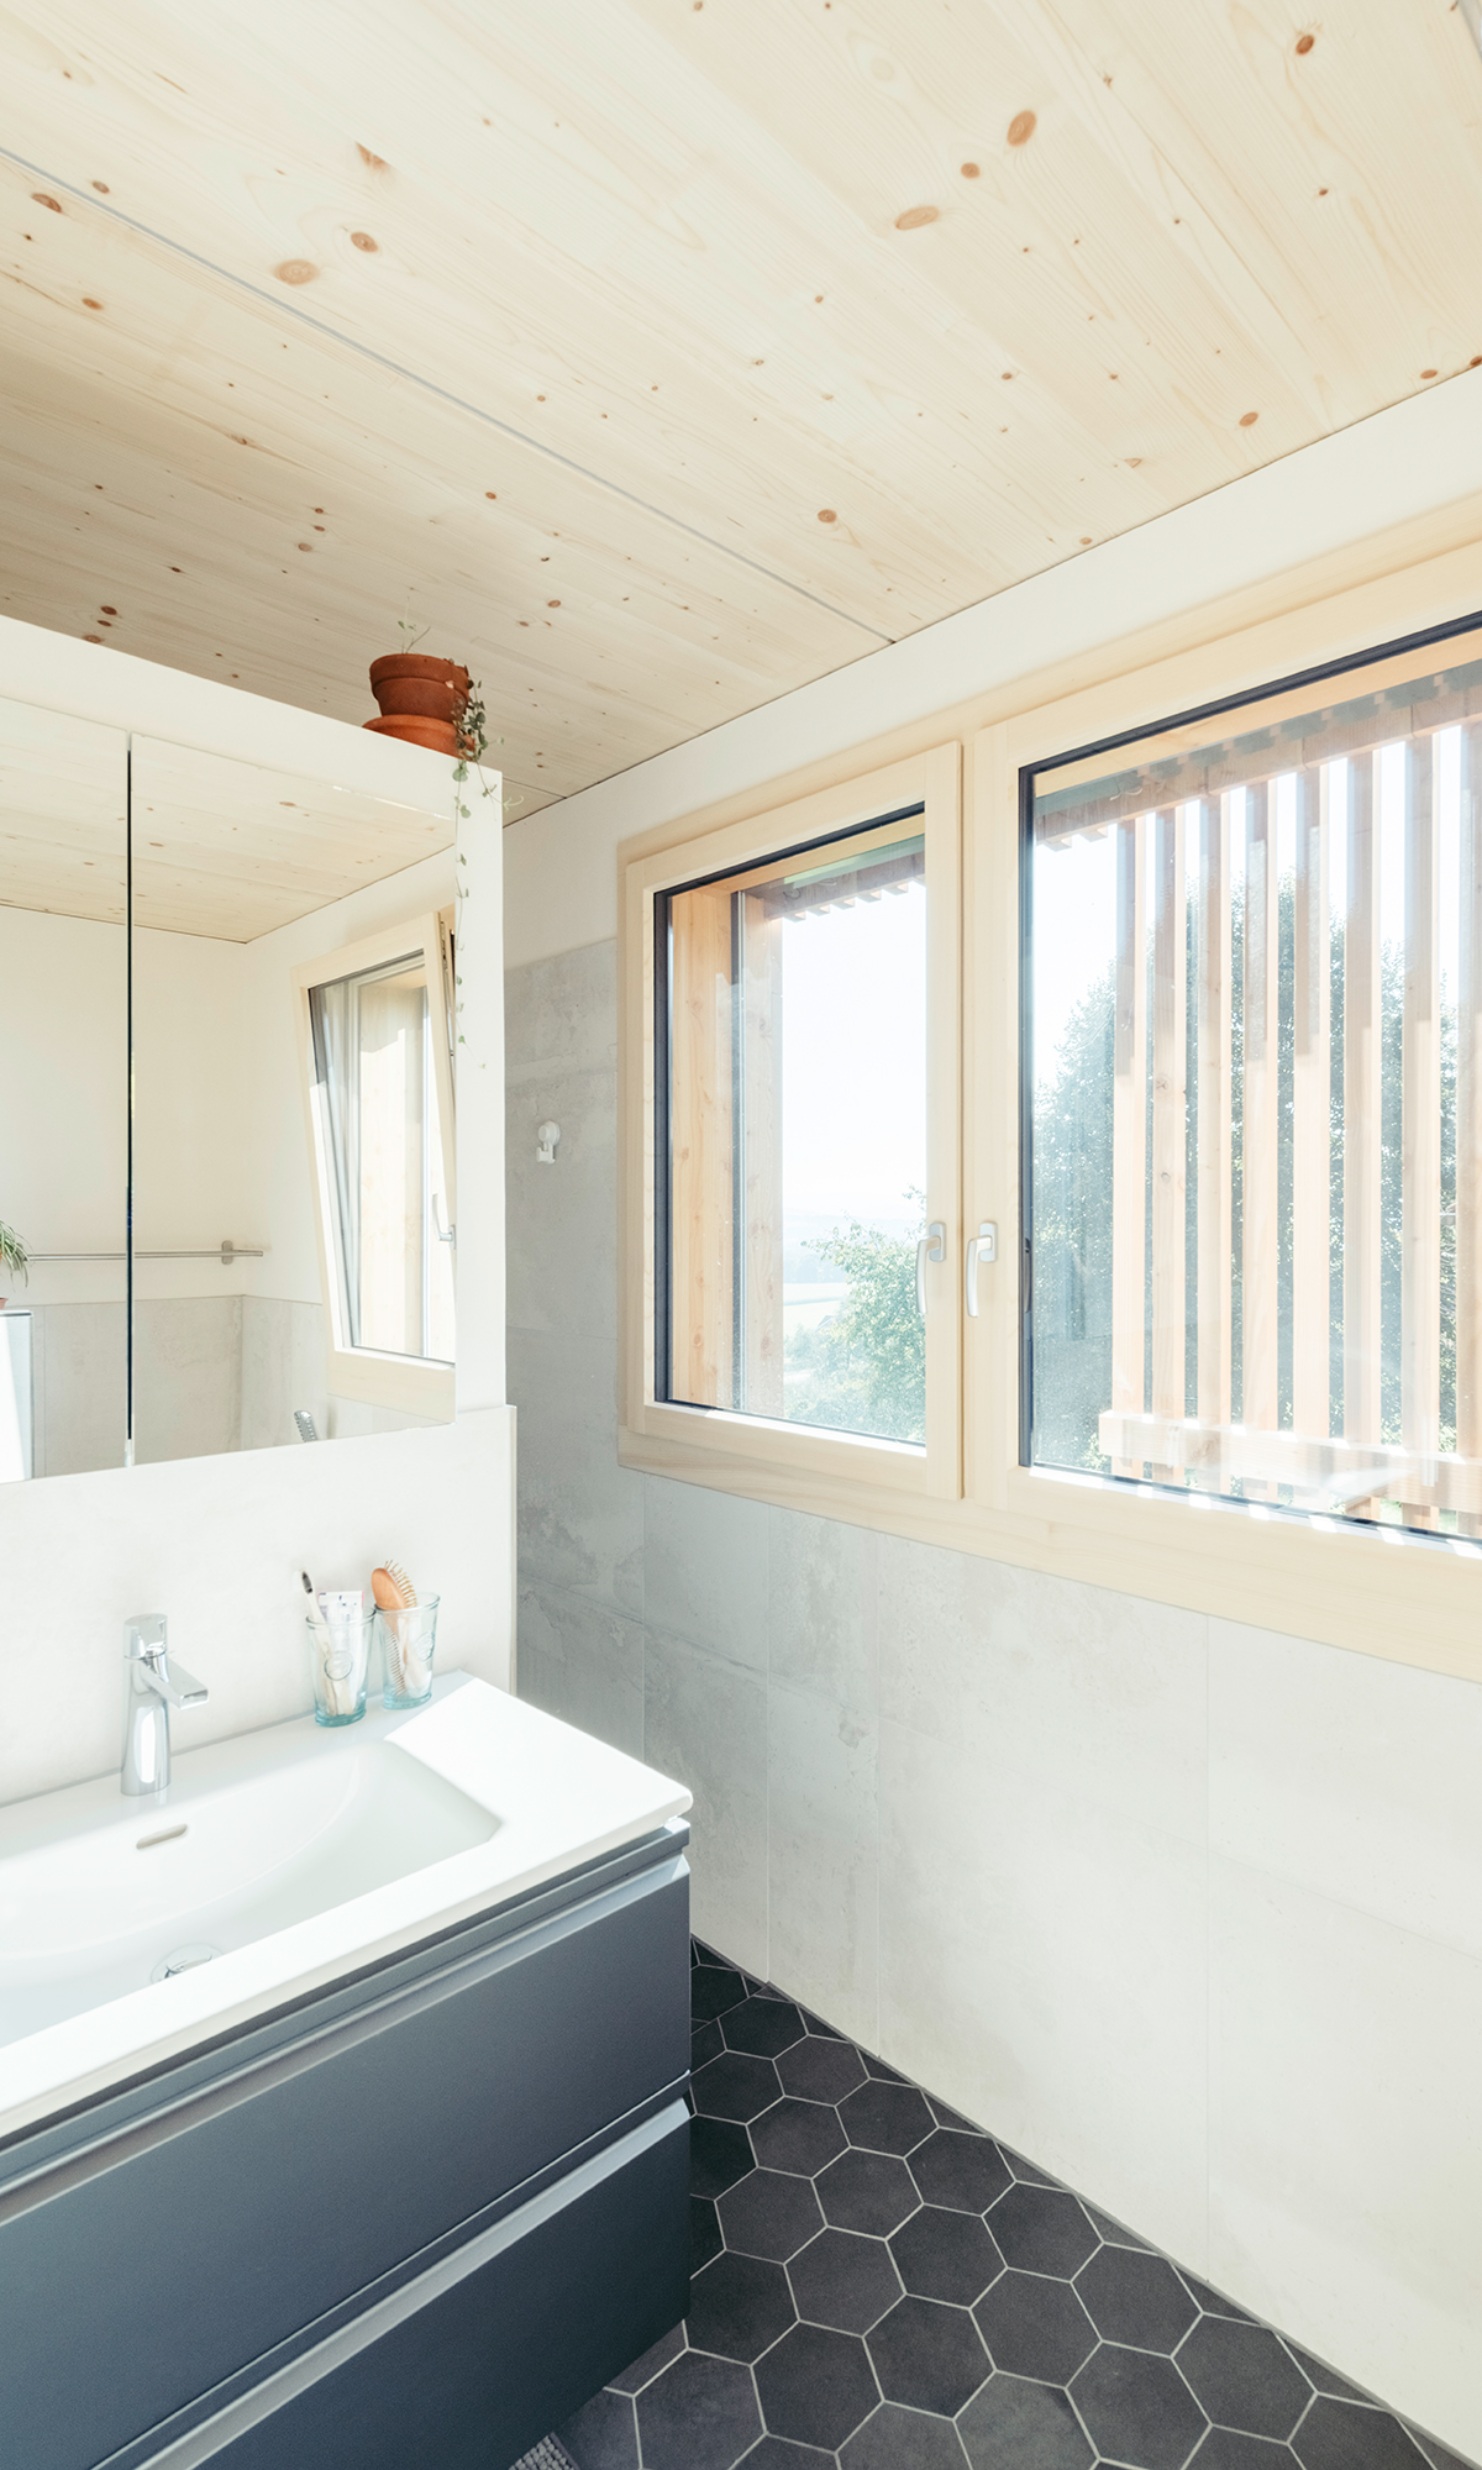 The windows let an abundance of natural light into the bathroom, which features grey flooring and furniture.